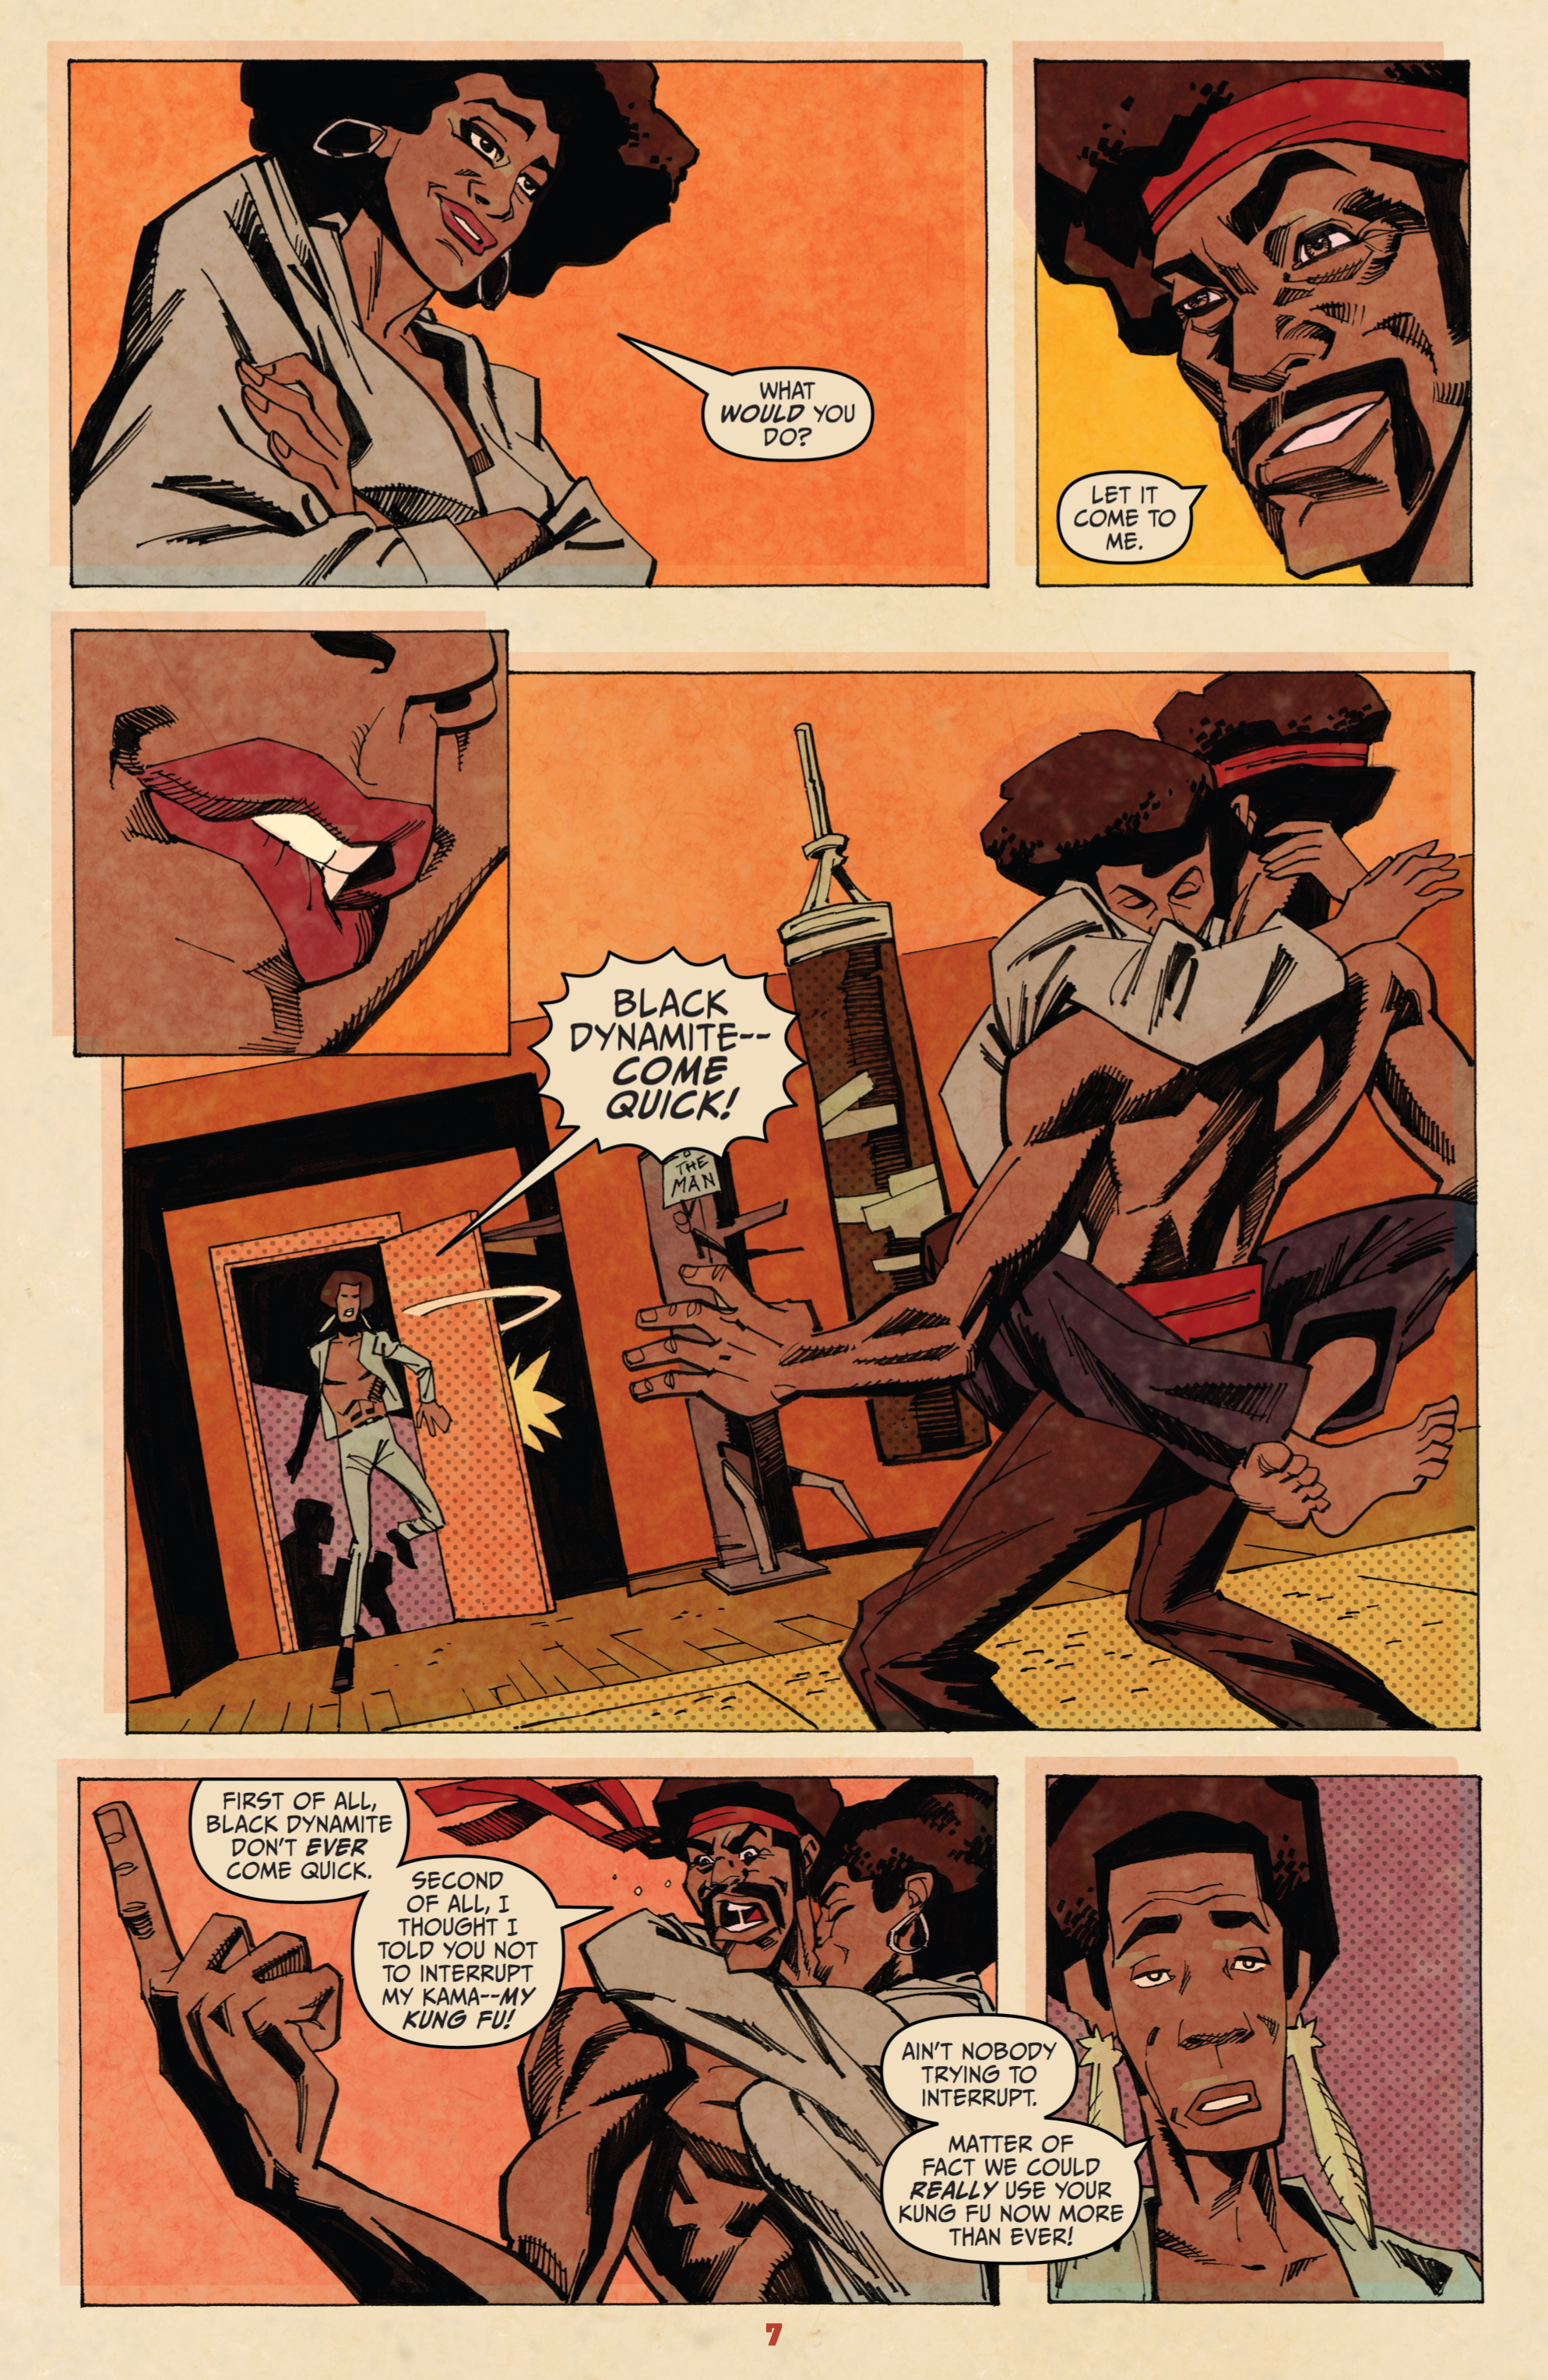 Black Dynamite Issue 1 | Read Black Dynamite Issue 1 comic online in high  quality. Read Full Comic online for free - Read comics online in high  quality .| READ COMIC ONLINE